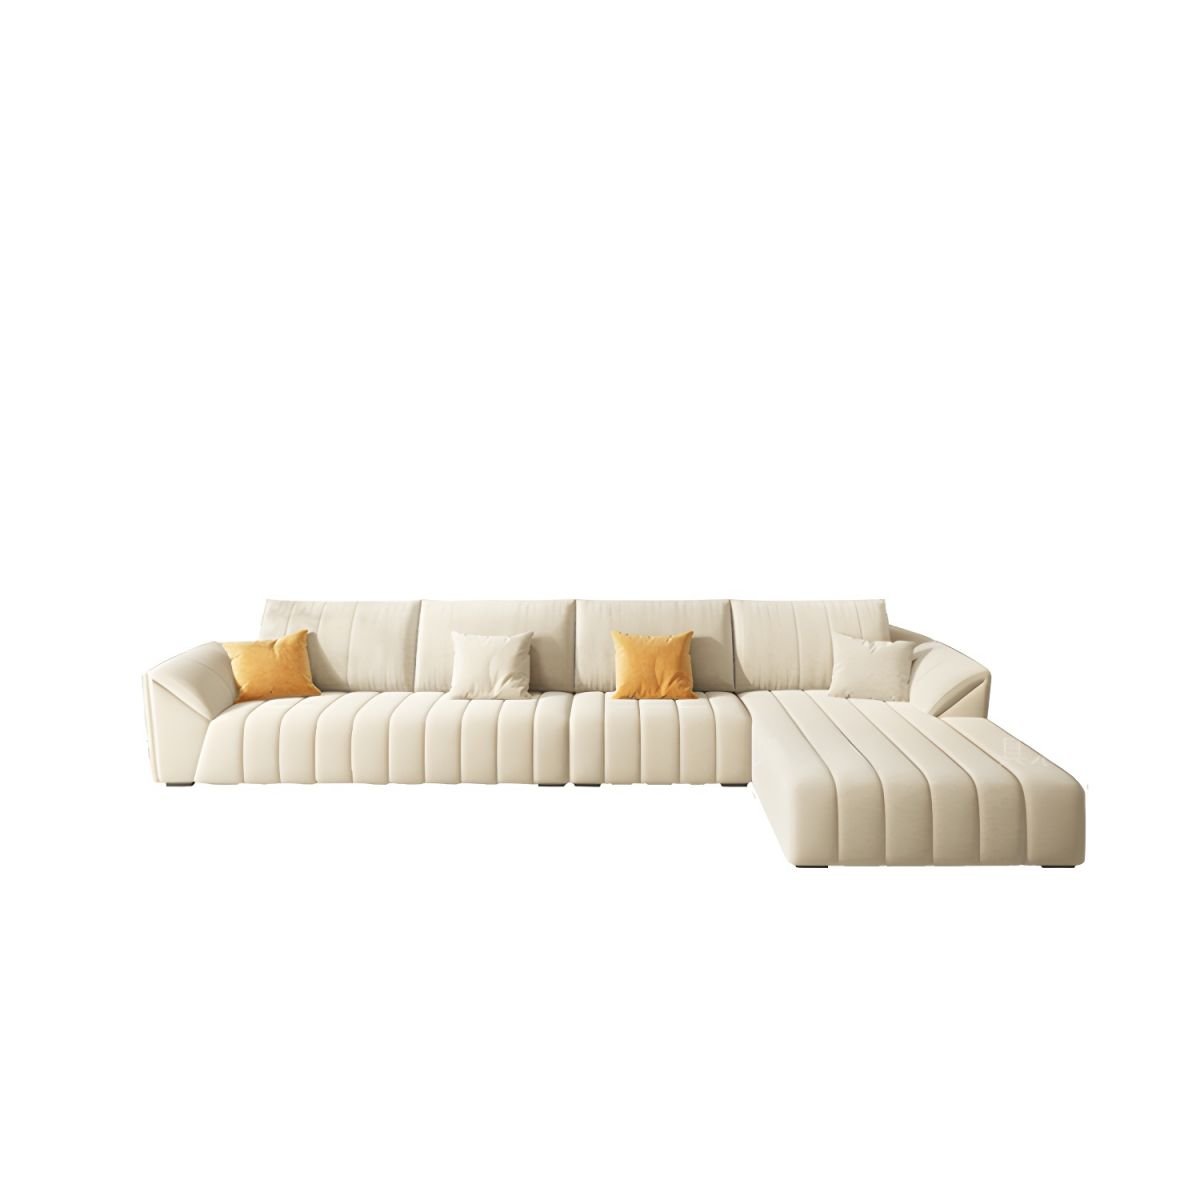 Contemporary Off-White L-Shaped Sofa & Chaise with Bolster Pillows - 145"L x 71"W x 37"H Milk Fleece Right